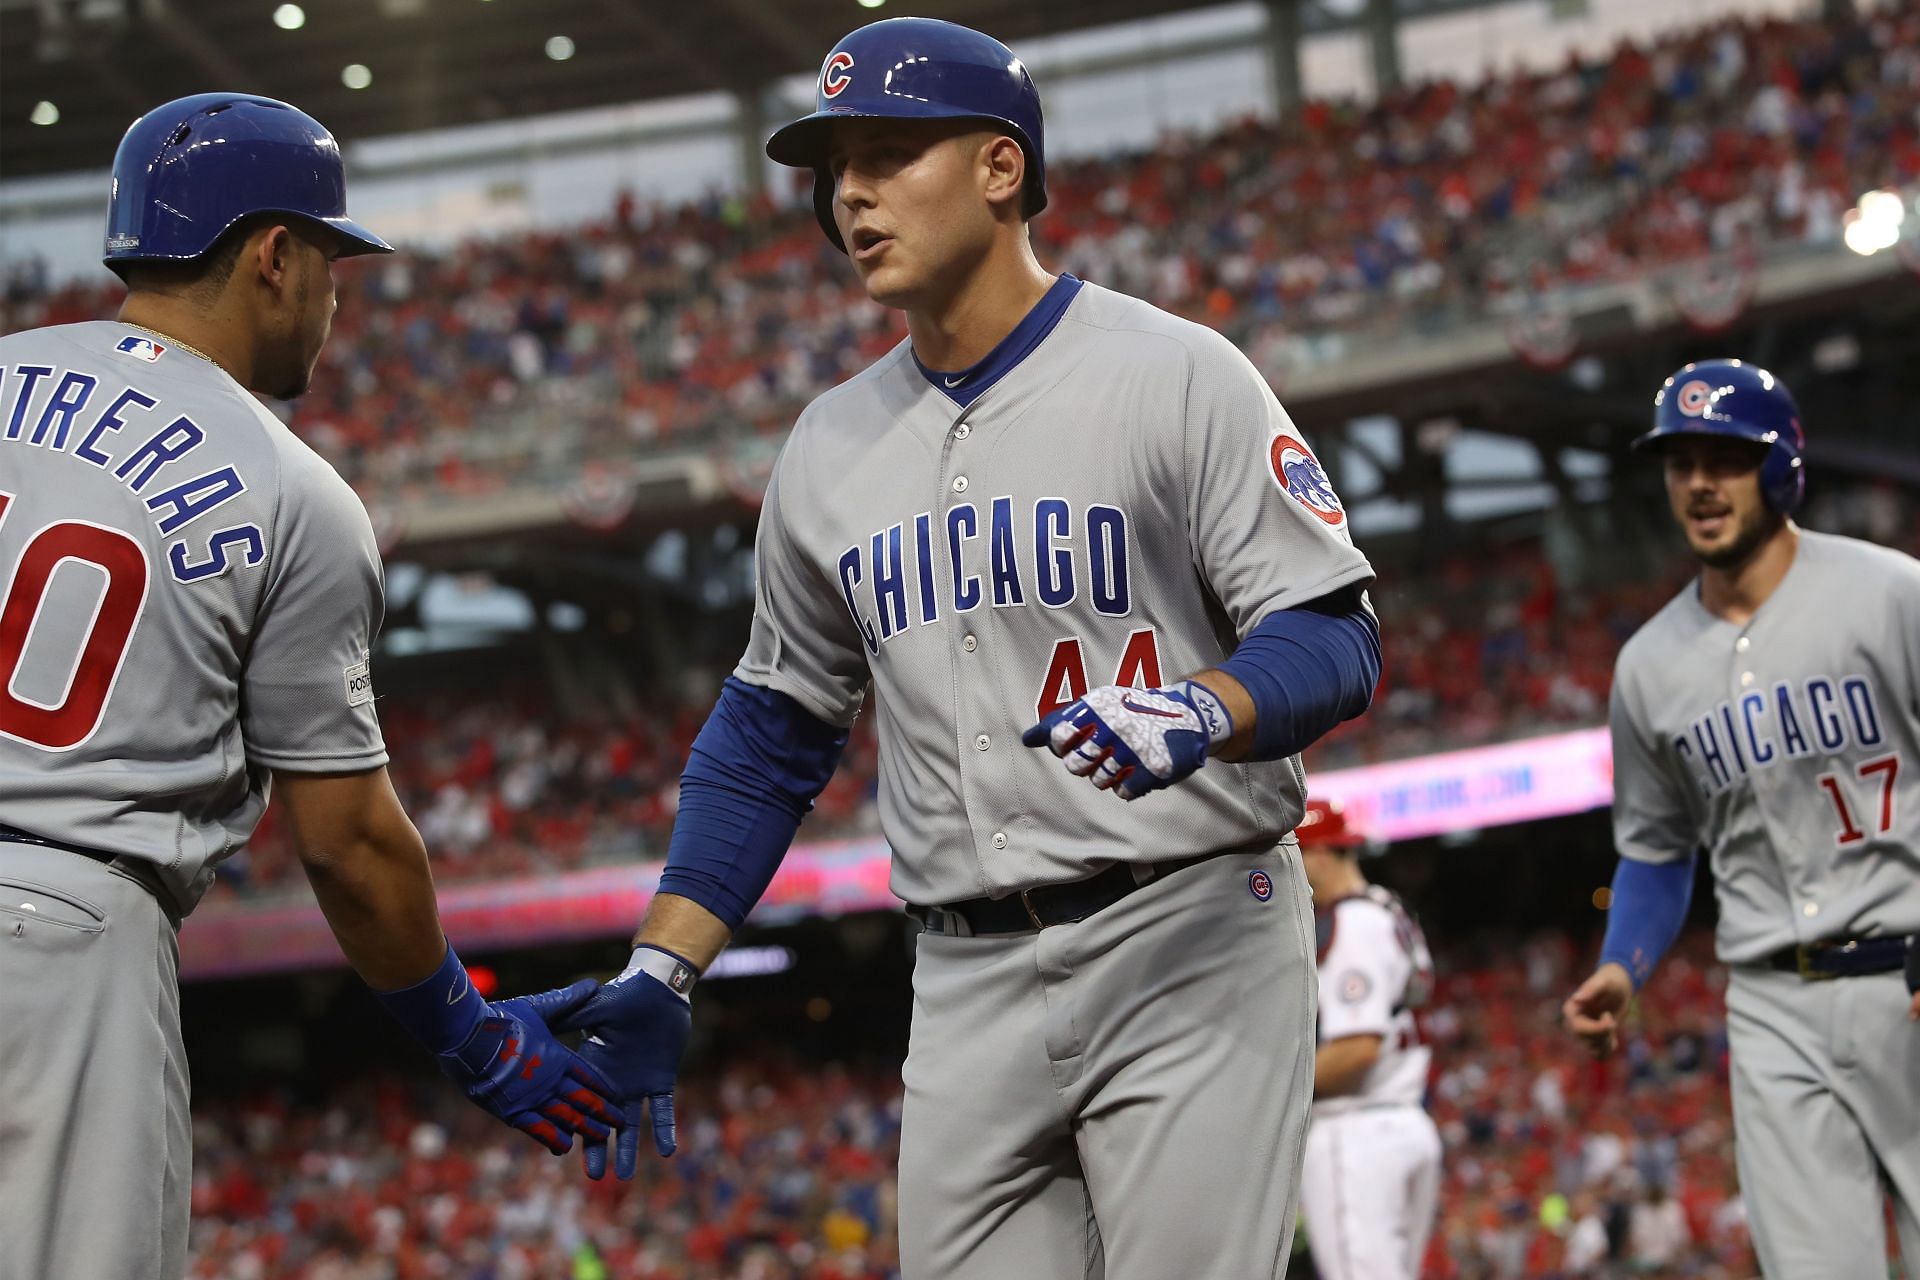 Anthony Rizzo (right) and Willson Contreras (left) celebreate a two-run home run by Kris Bryant during the MLB Divisional Round - Chicago Cubs v Washington Nationals - Game Two.